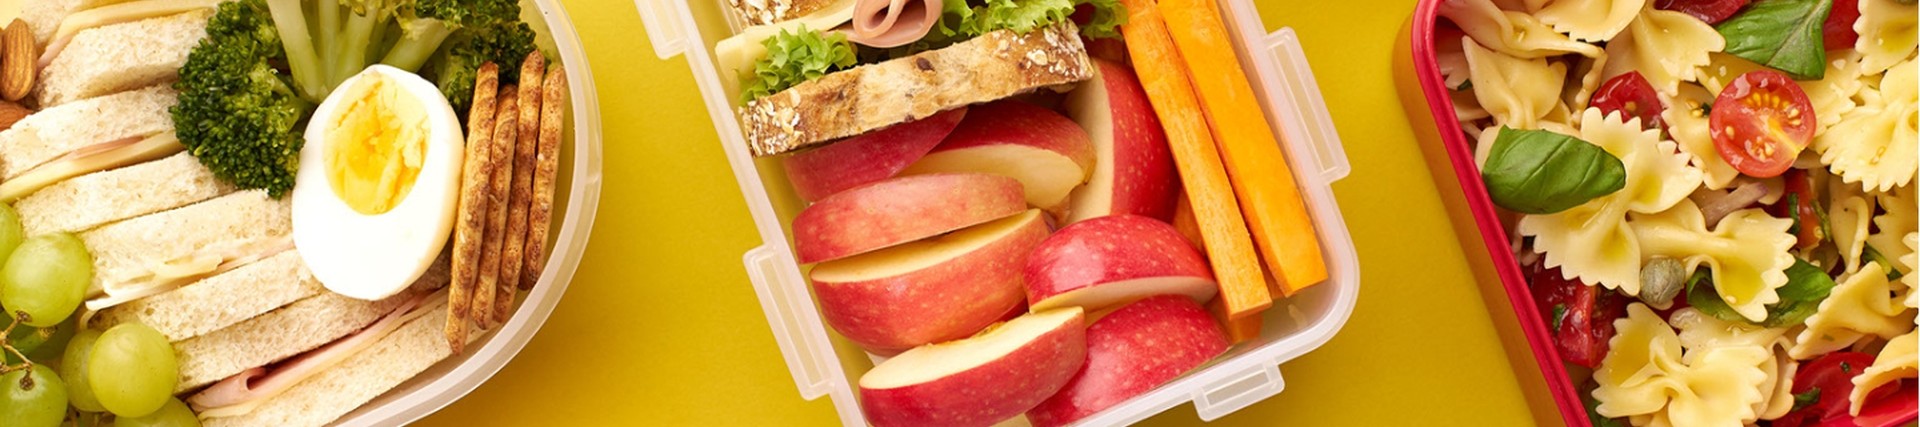 Three lunchboxes with different lunches inside - sandwiches, pasta, fruit and veg